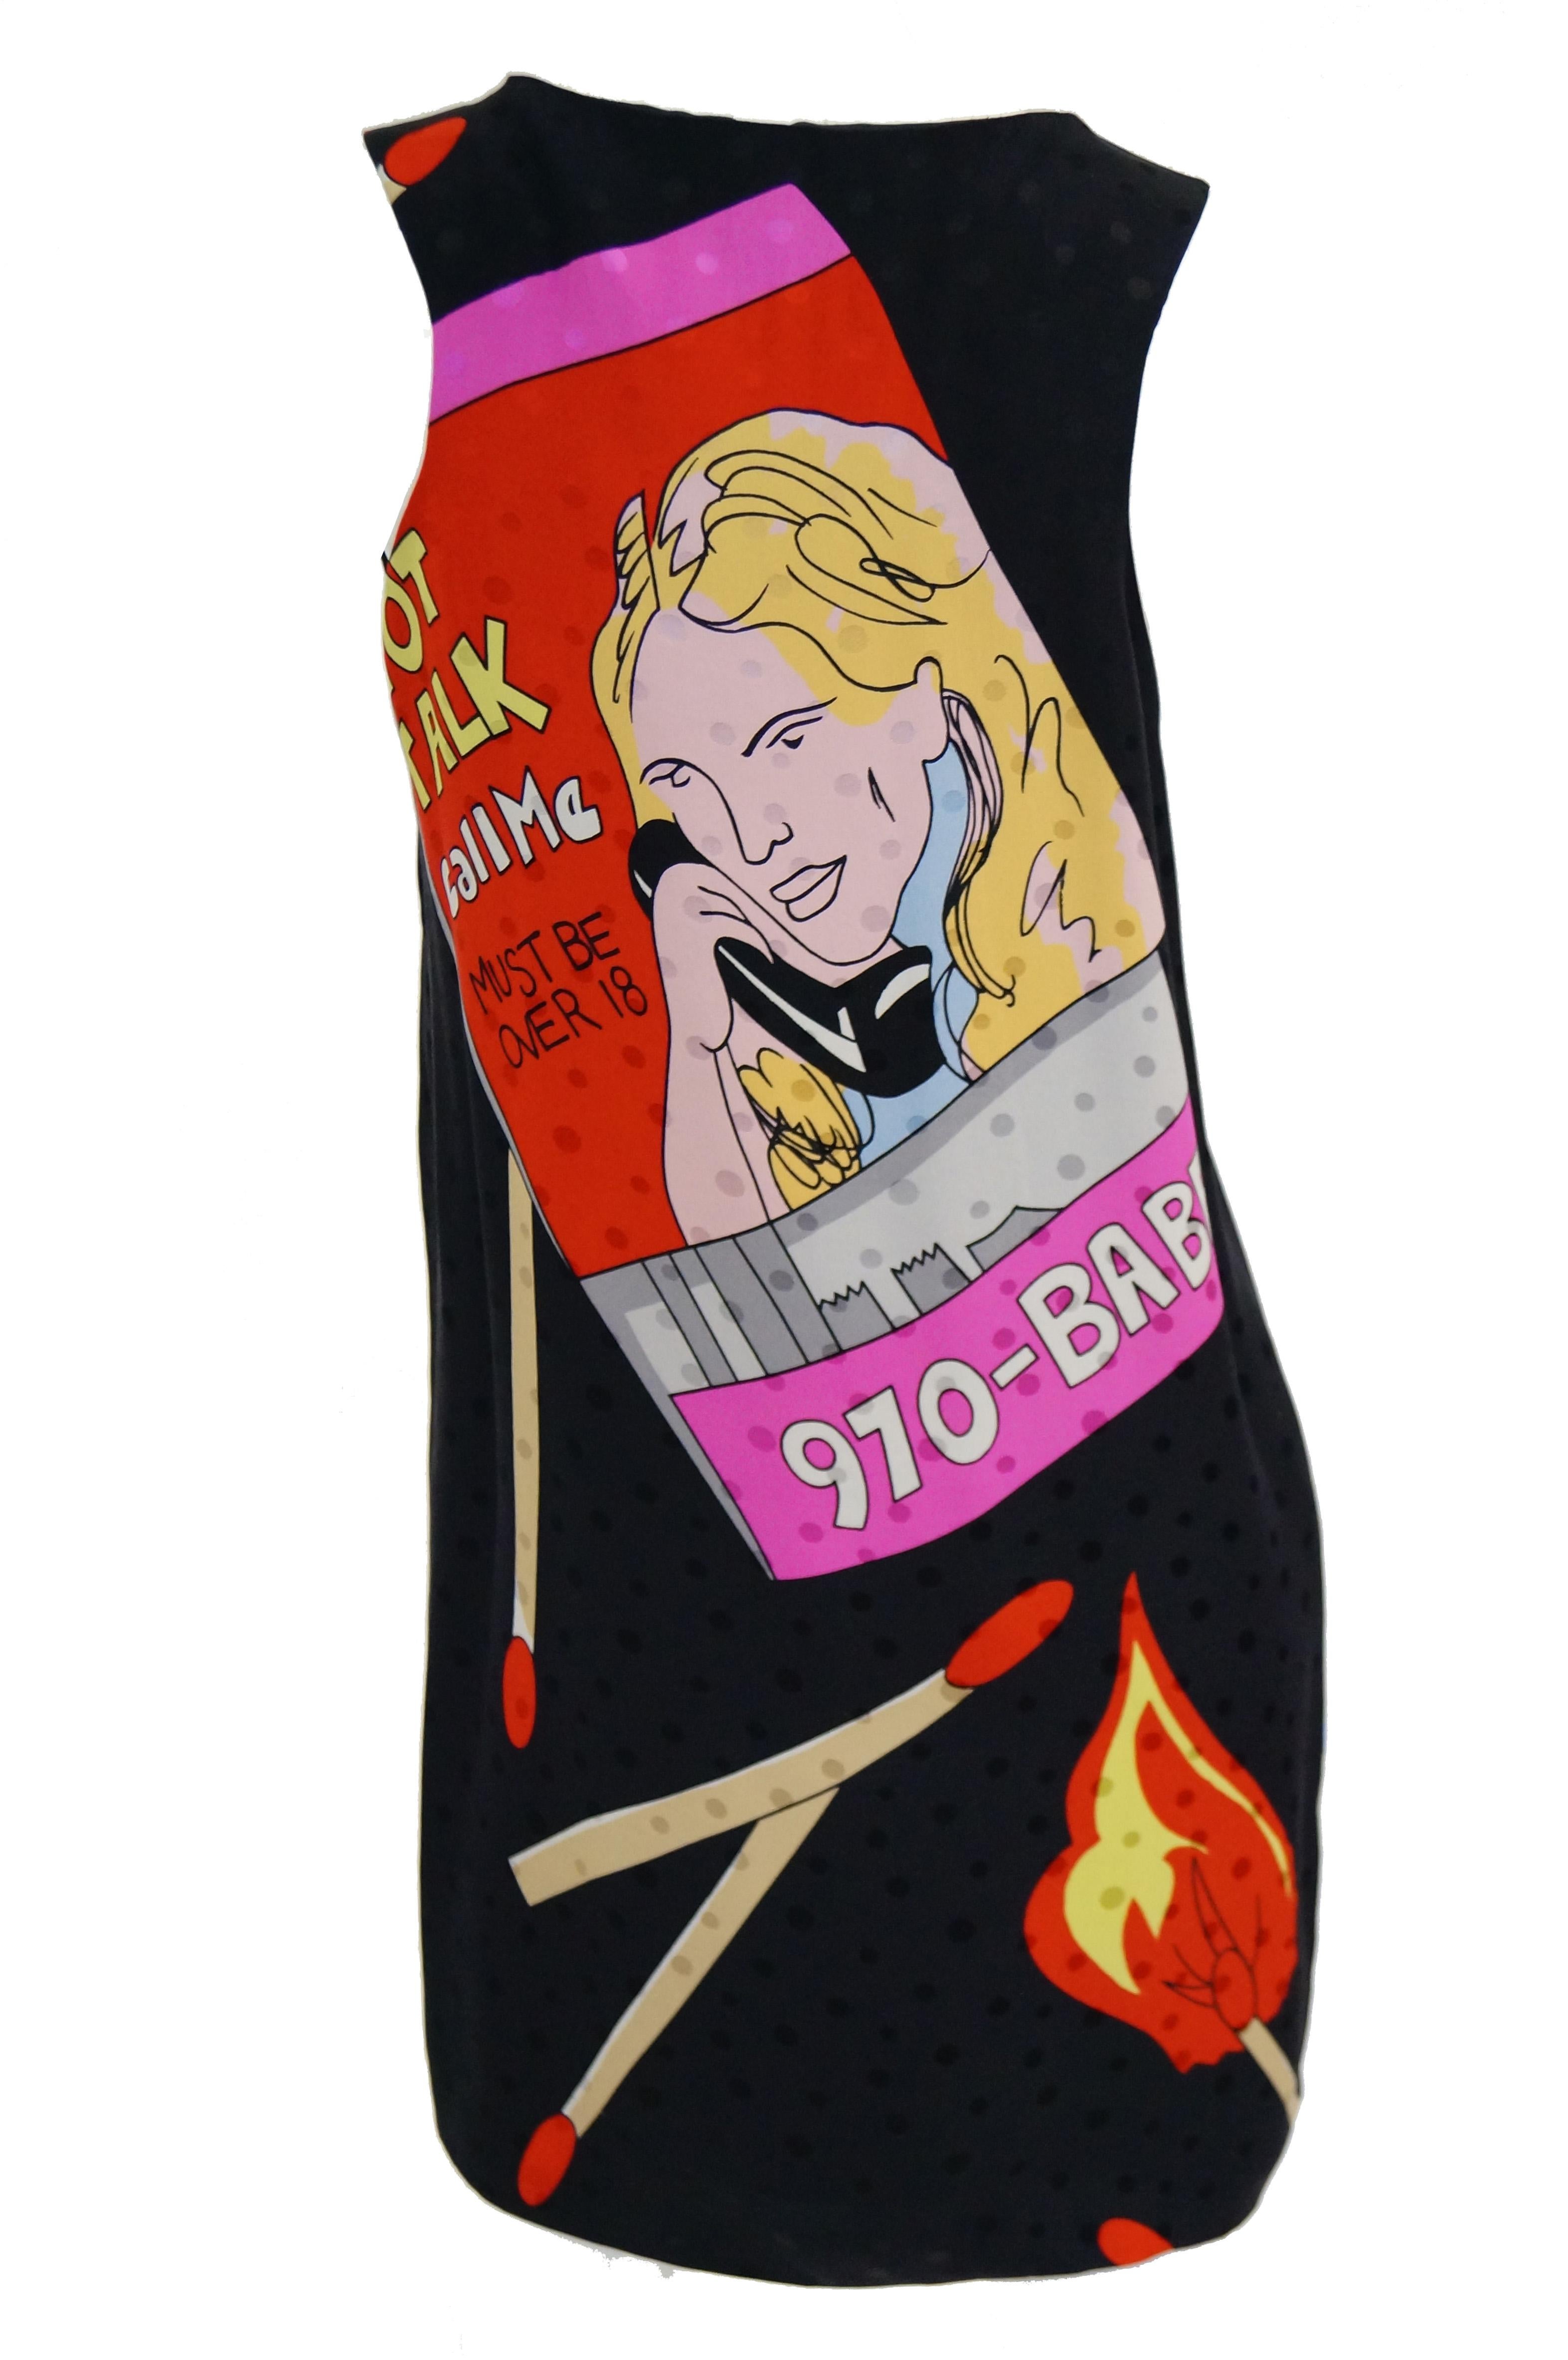 Amazing silk Pop Art shift dress by Nicole Miller! The dress is knee length, sleeveless, and has a wide neckline. The silk dress has polka dots woven in, and features various fun graphics on a black background, including matchbooks with dancers and